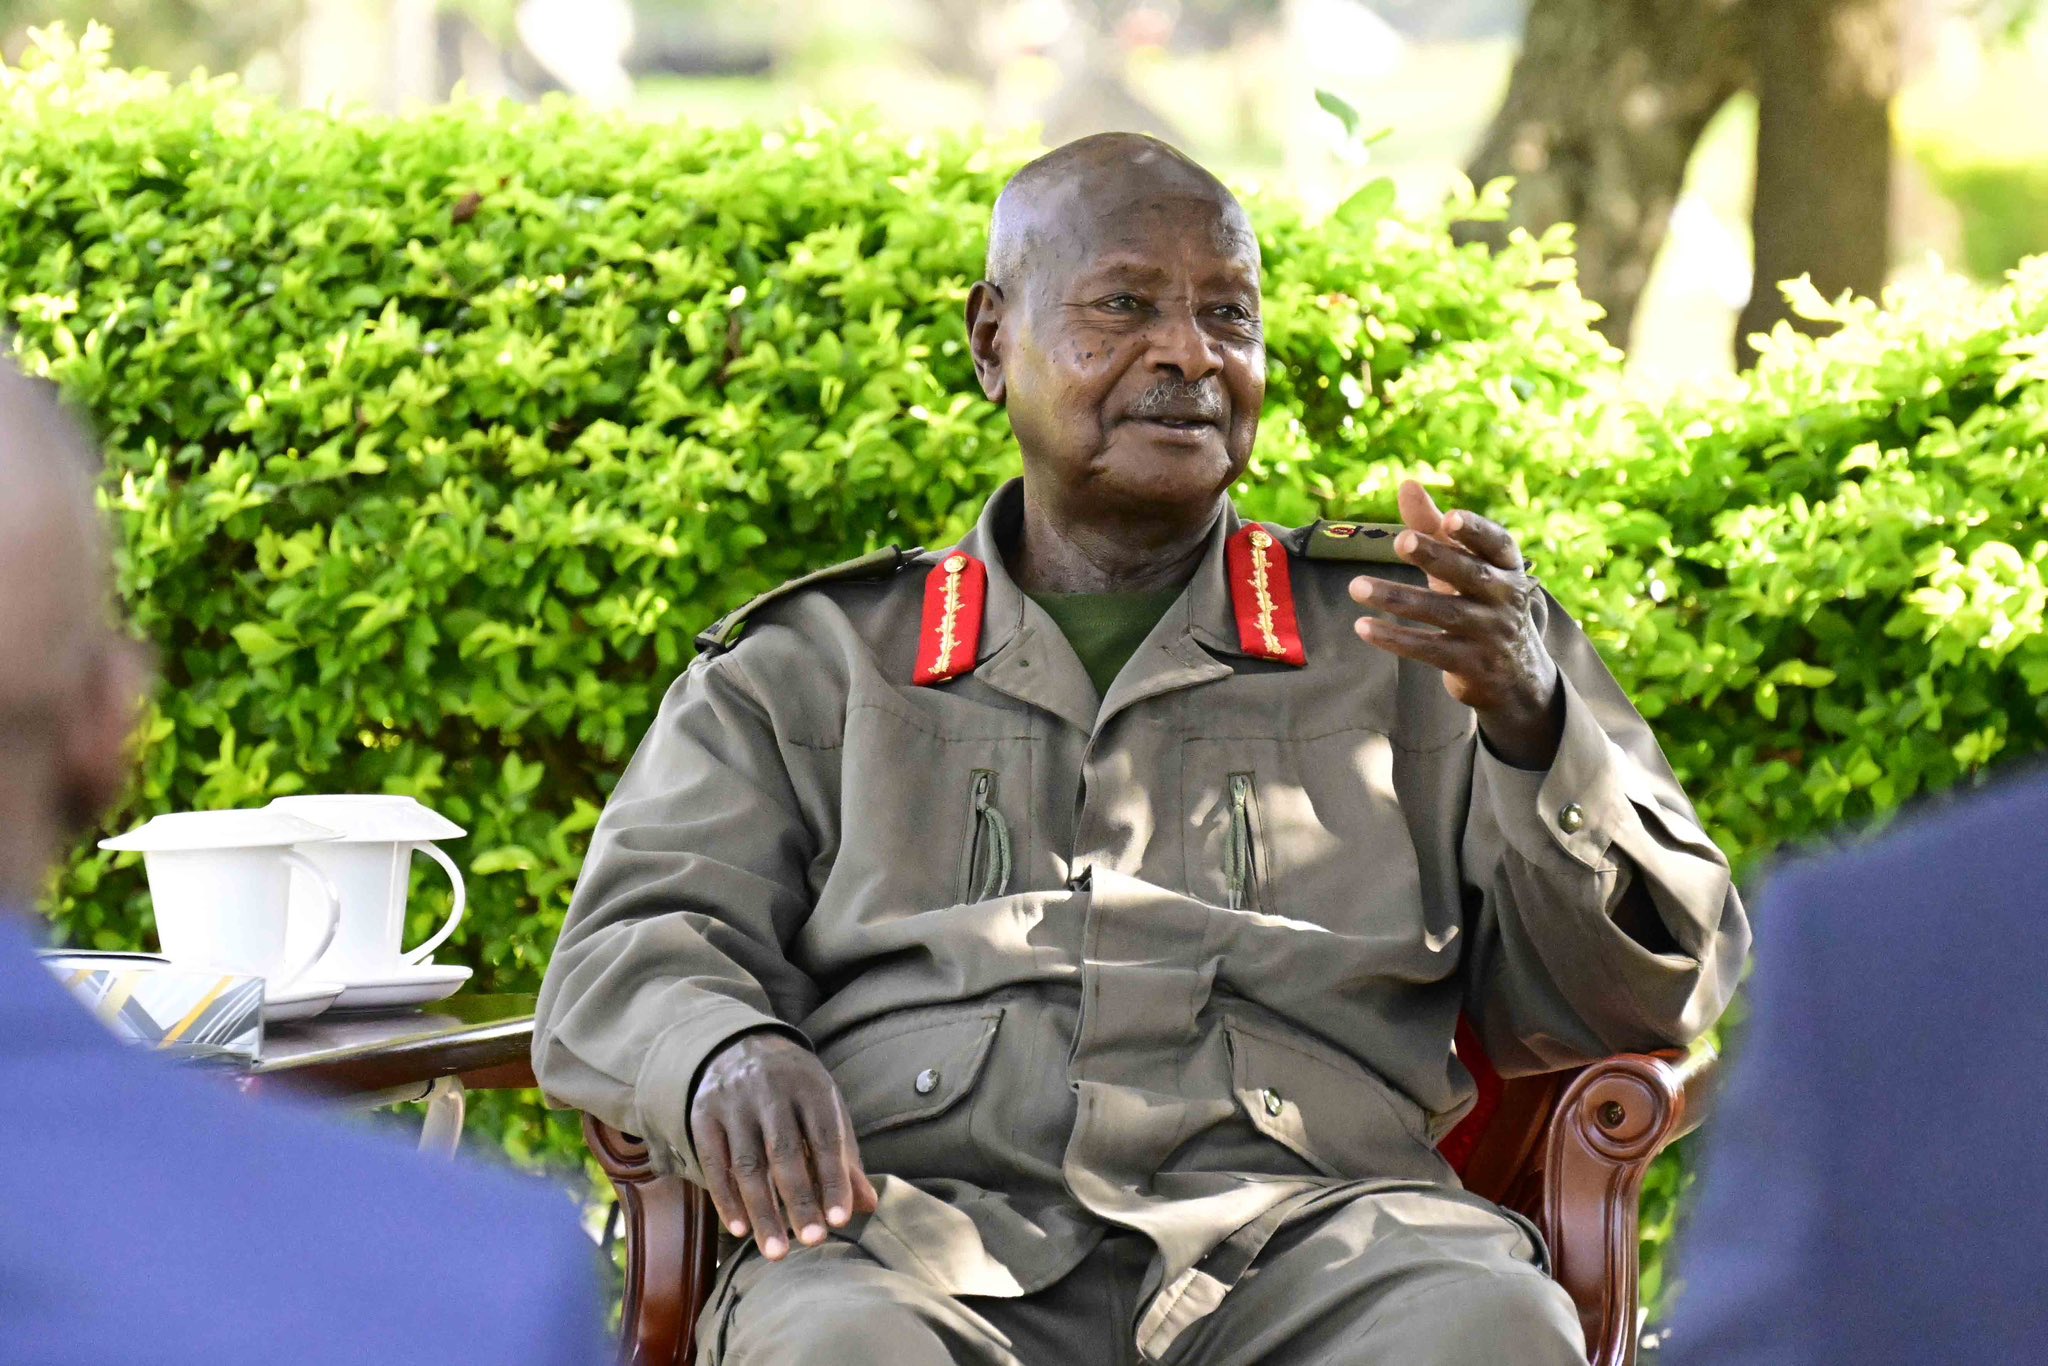 “The relationship between Uganda and DRC is strong and harmonious” – Says President Museveni